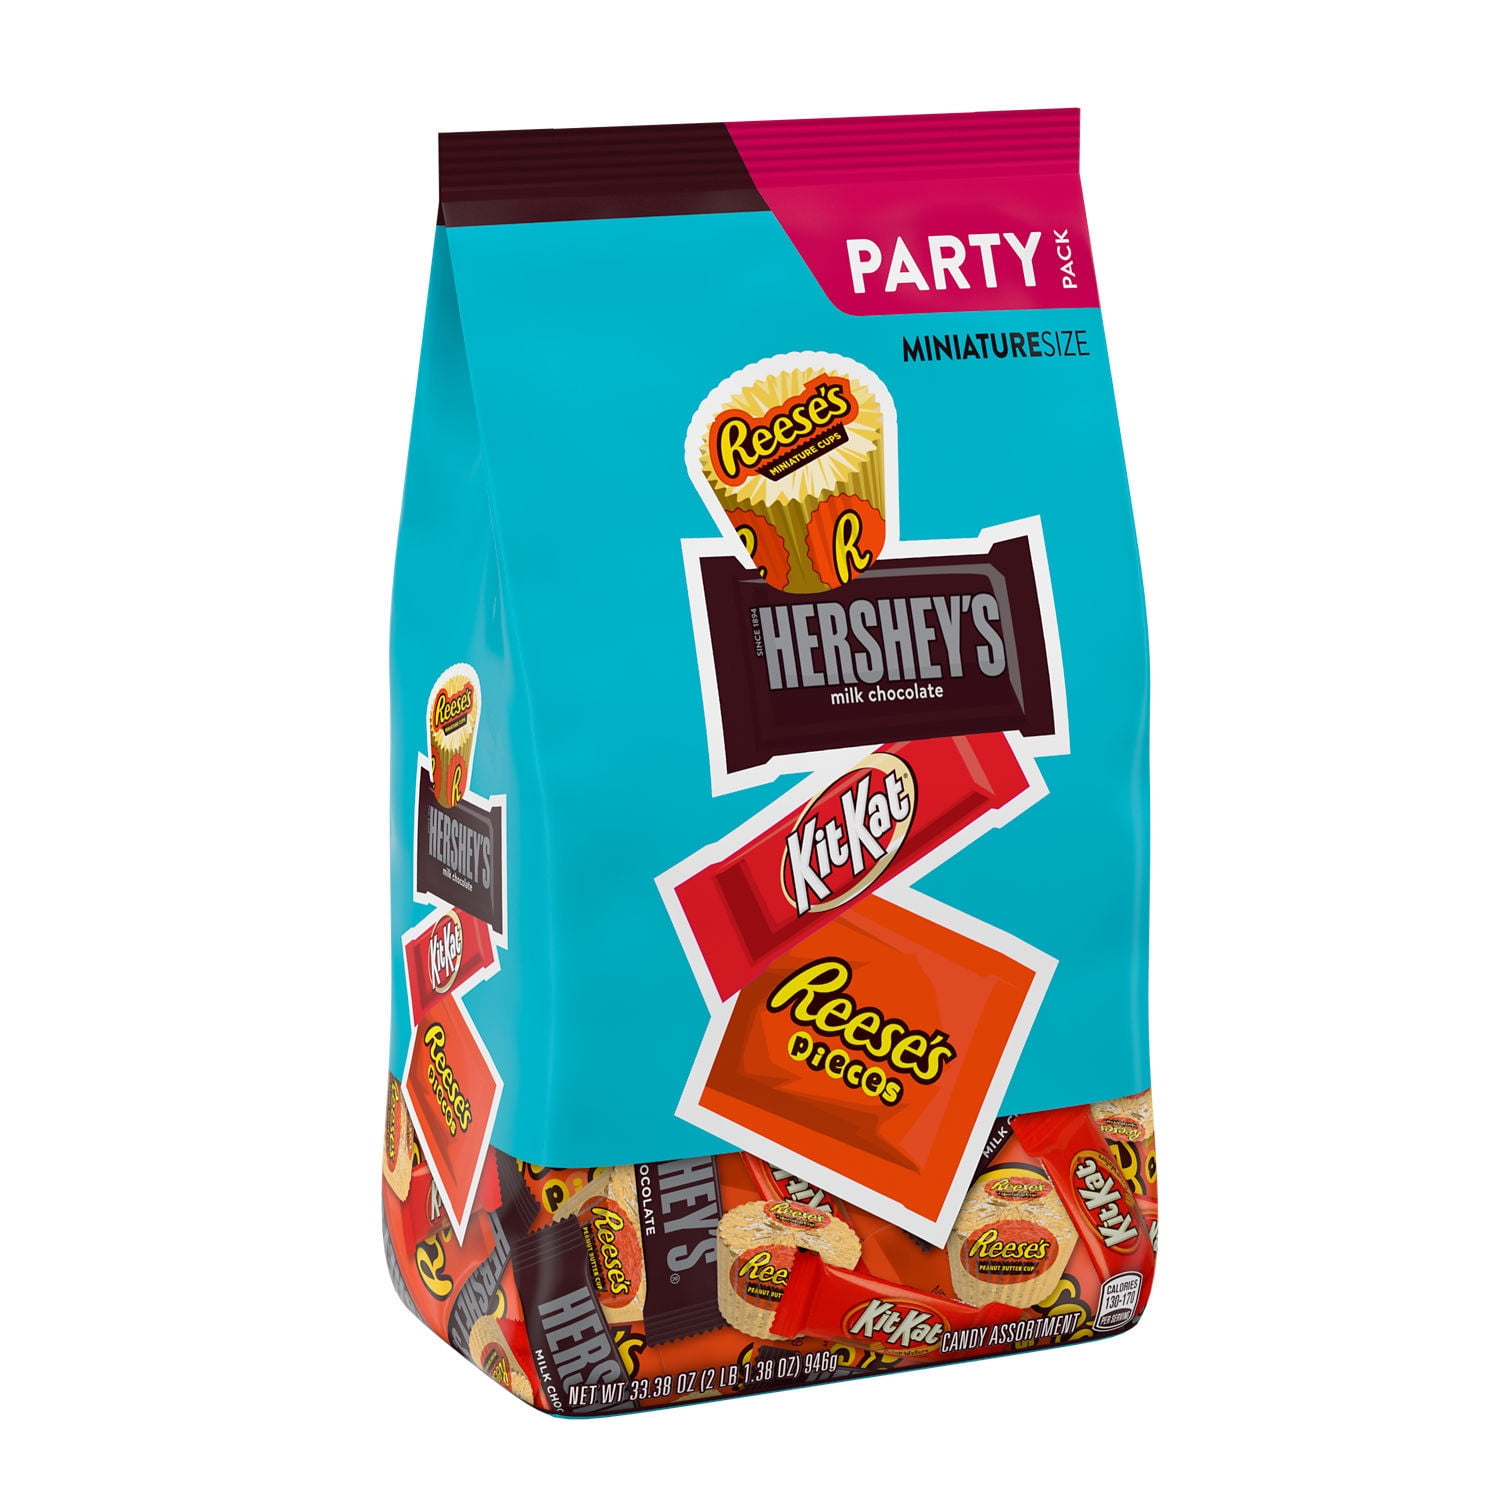 Reese's, Hershey's and Kit Kat Miniatures Milk Chocolate and Peanut Butter Assortment Bite Size, Easter Candy Bulk Party Pack, 33.38 oz